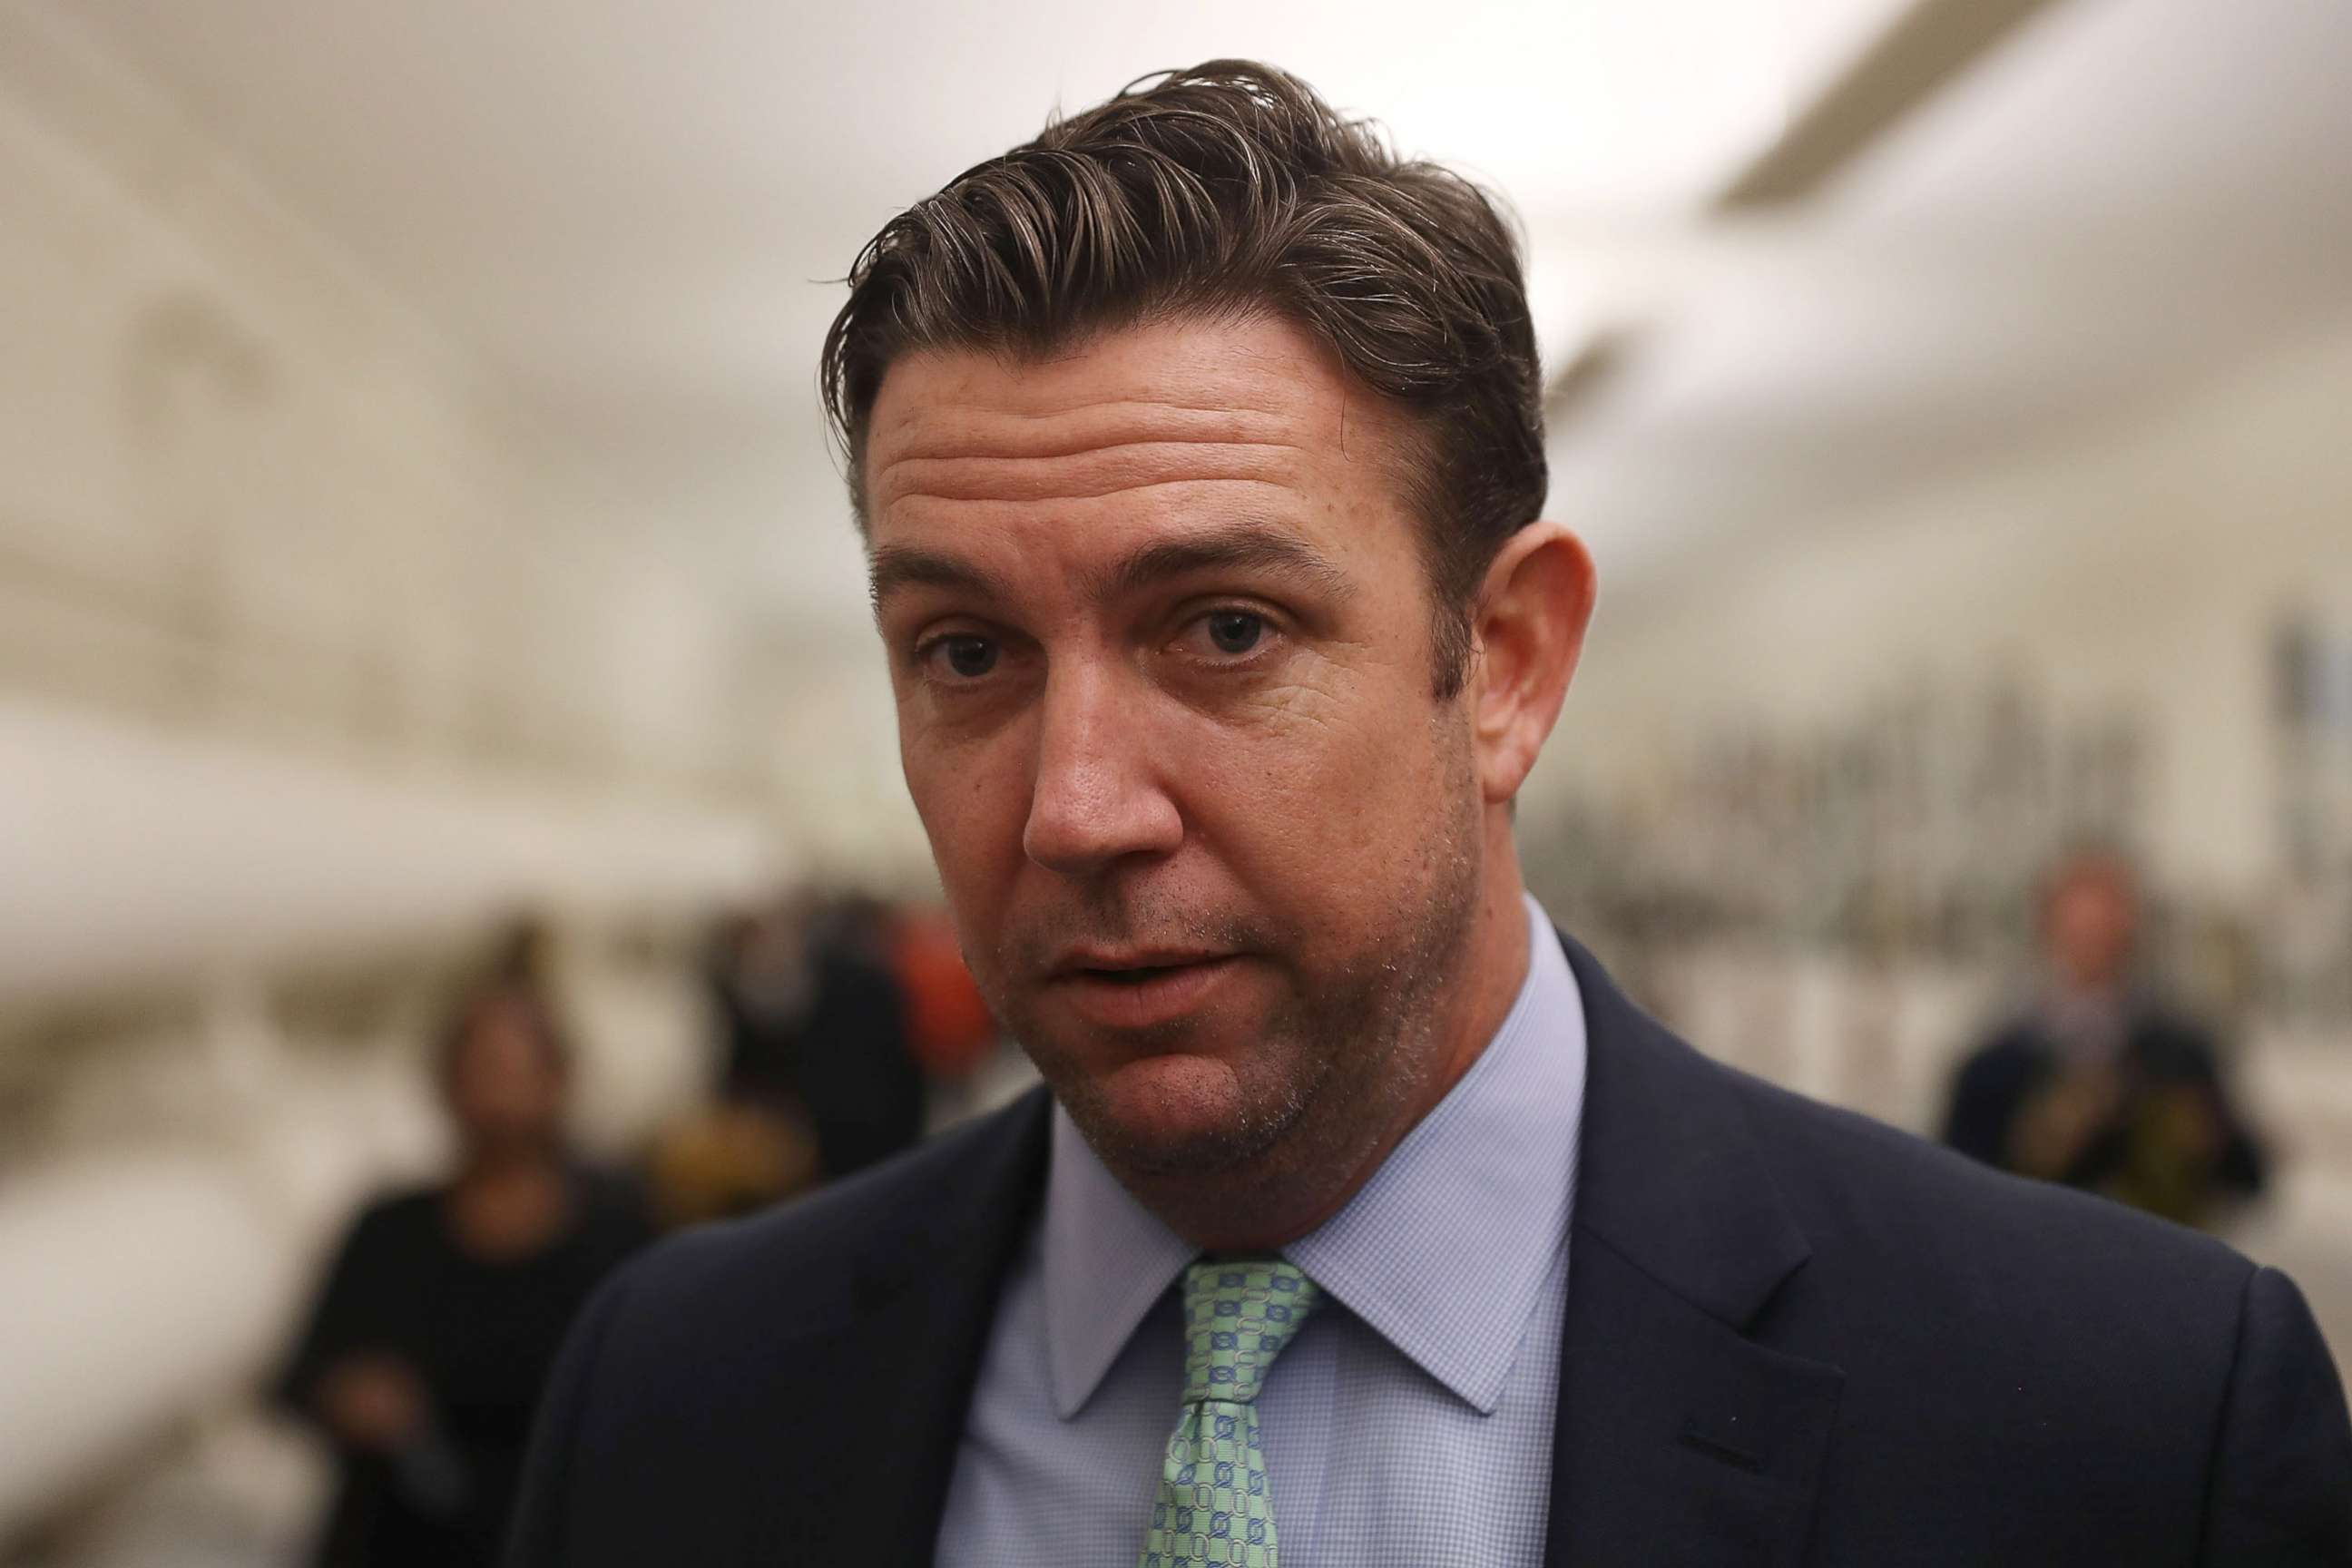 PHOTO: Rep. Duncan Hunter speaks to the media at the U.S. Capitol, Jan. 10, 2017, in Washington, D.C.